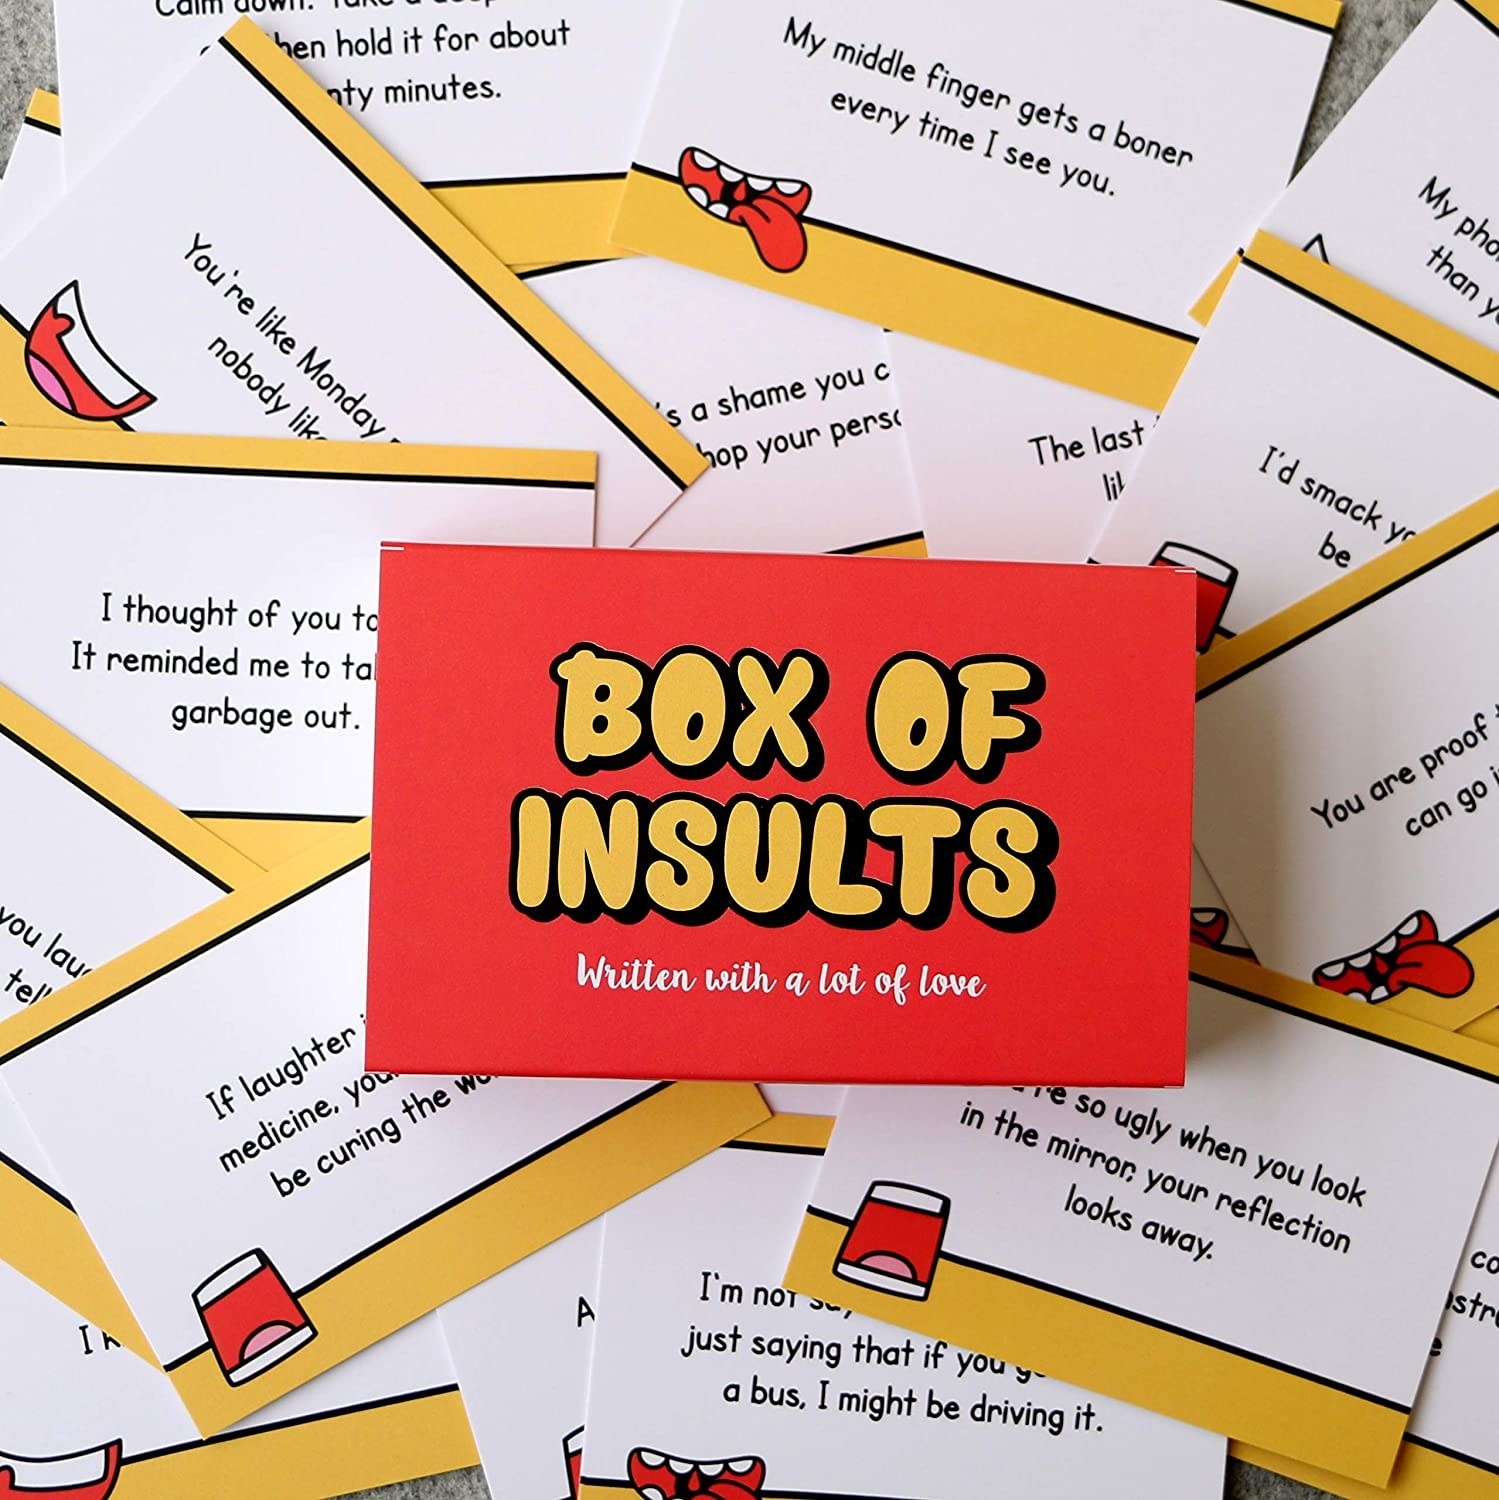 A box of insults kept over a background of different insulting cards, reading things like &quot;You&#x27;re so ugly when you look in the mirror, your reflection looks away.&quot;